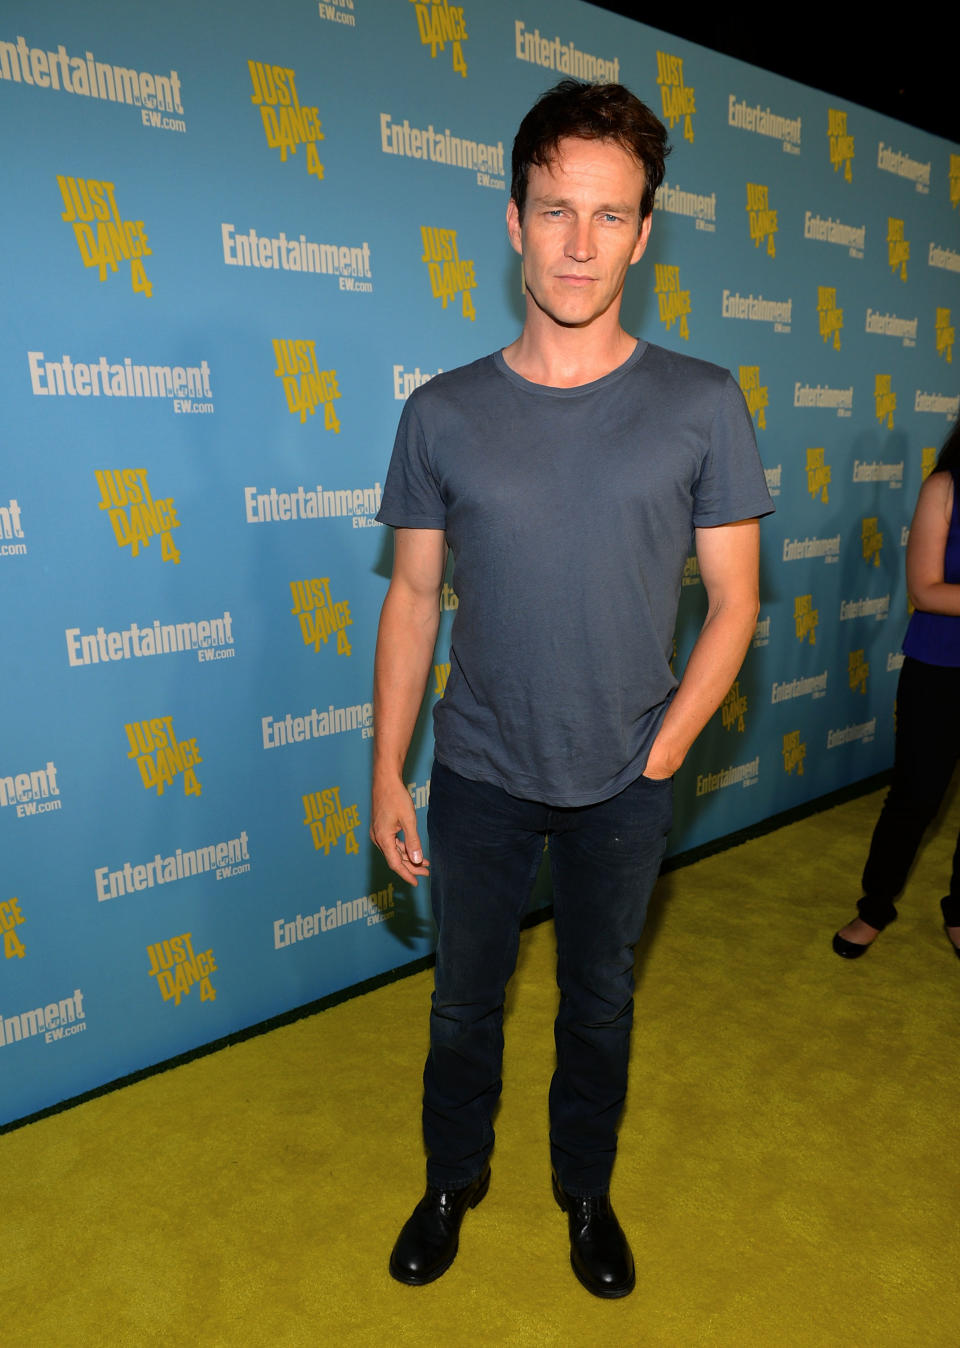 Entertainment Weekly's 6th Annual Comic-Con Celebration Sponsored By Just Dance 4